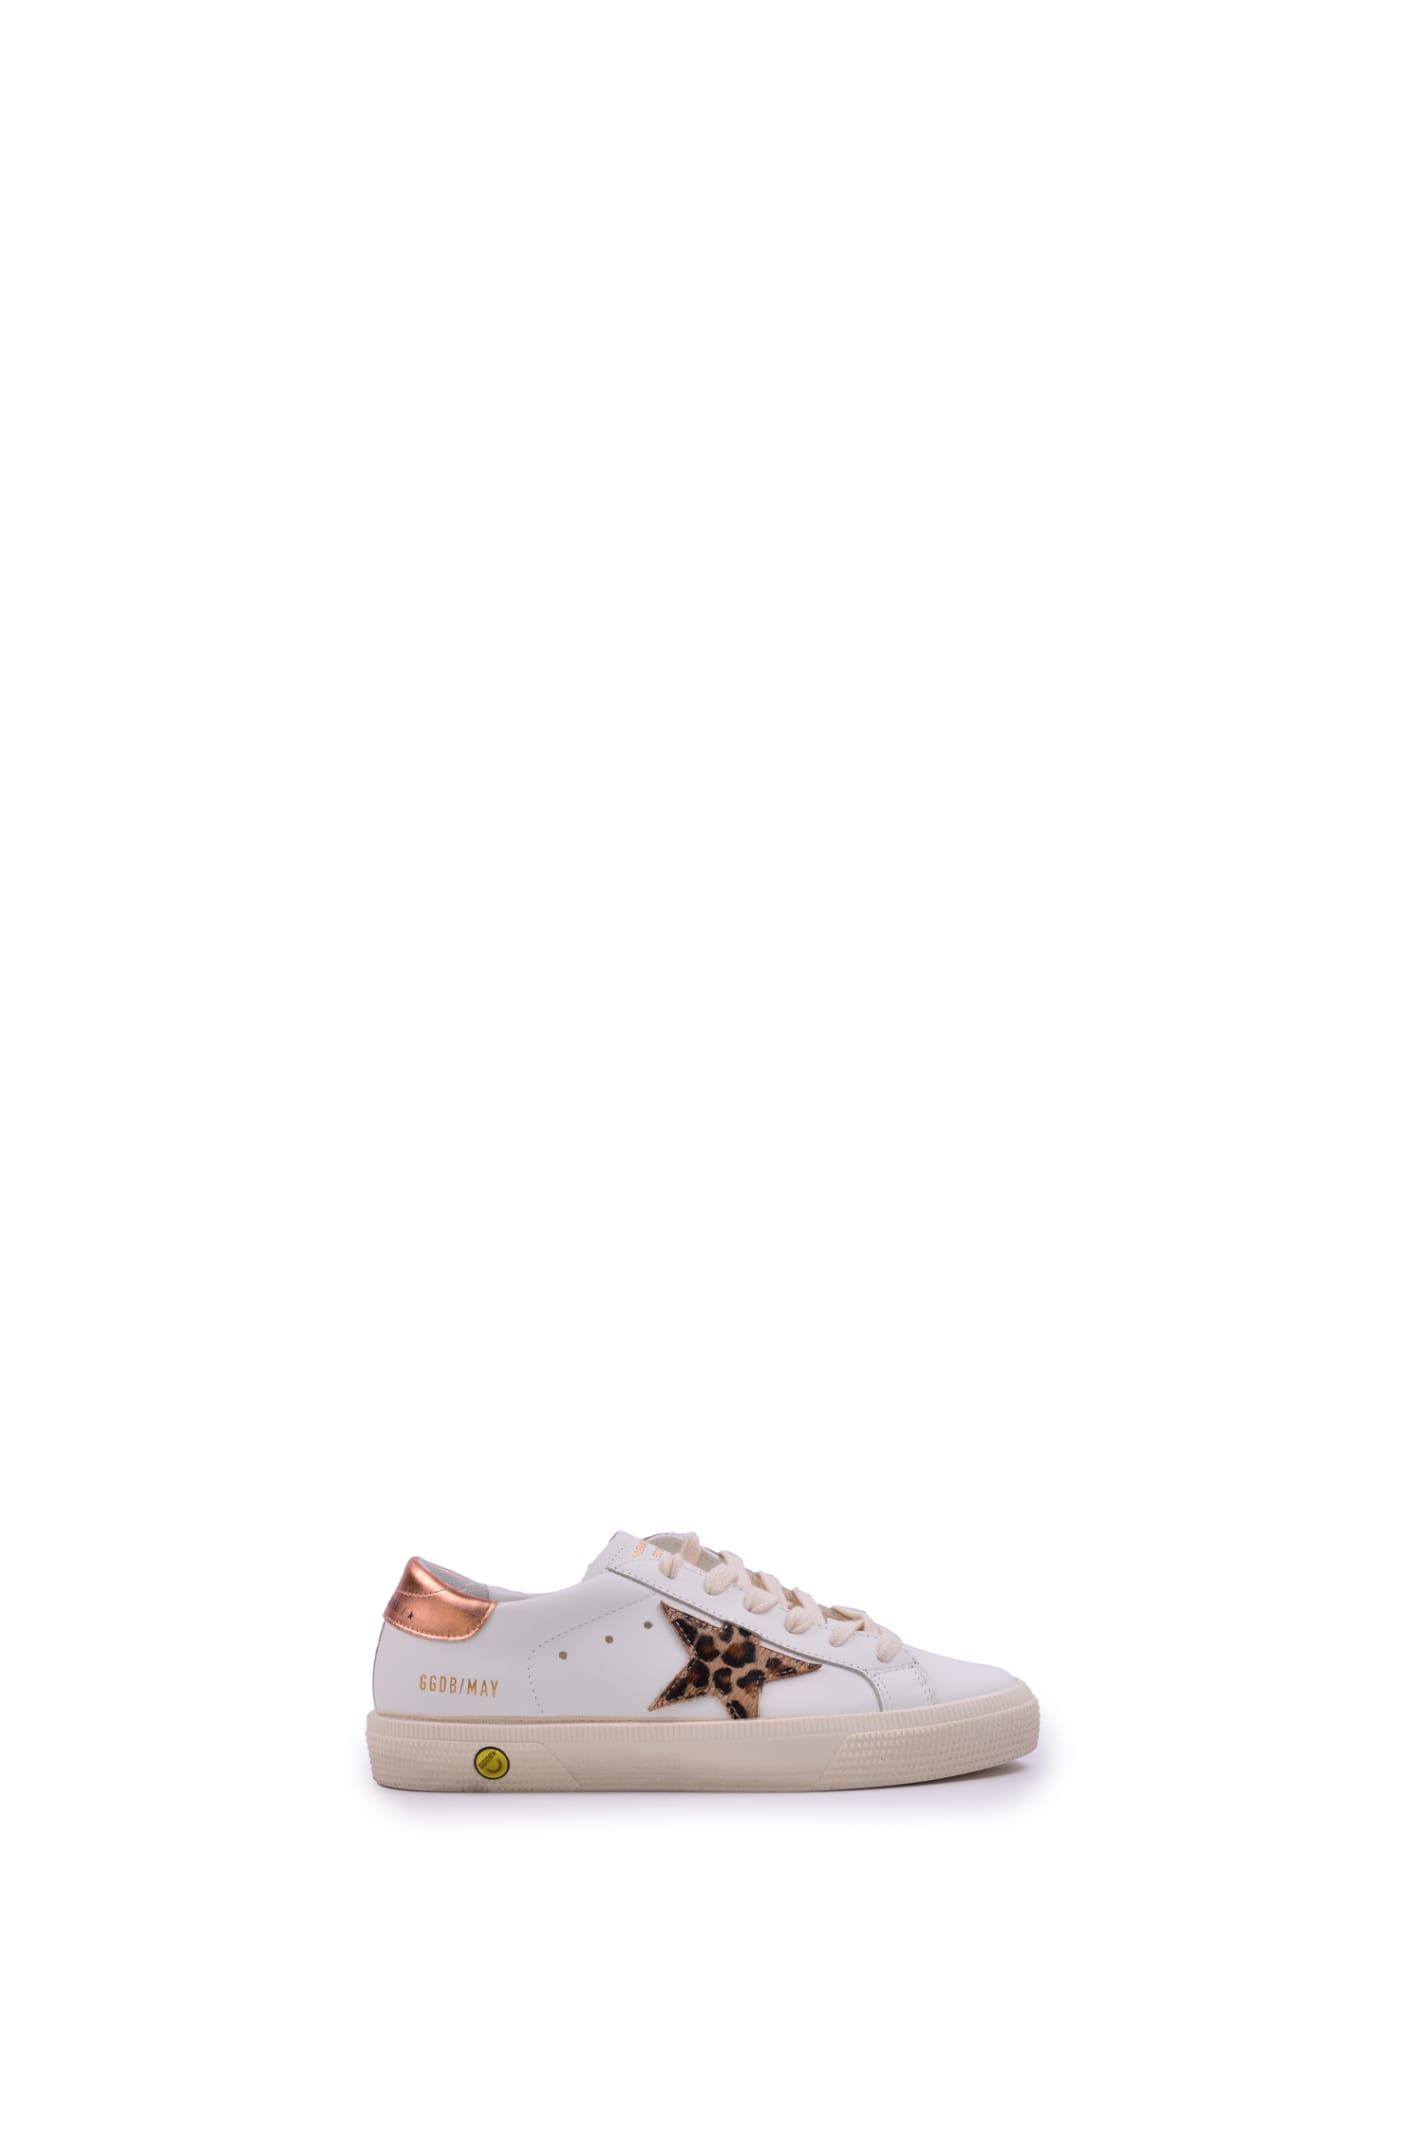 Golden Goose Kids' Leather Sneakers In White